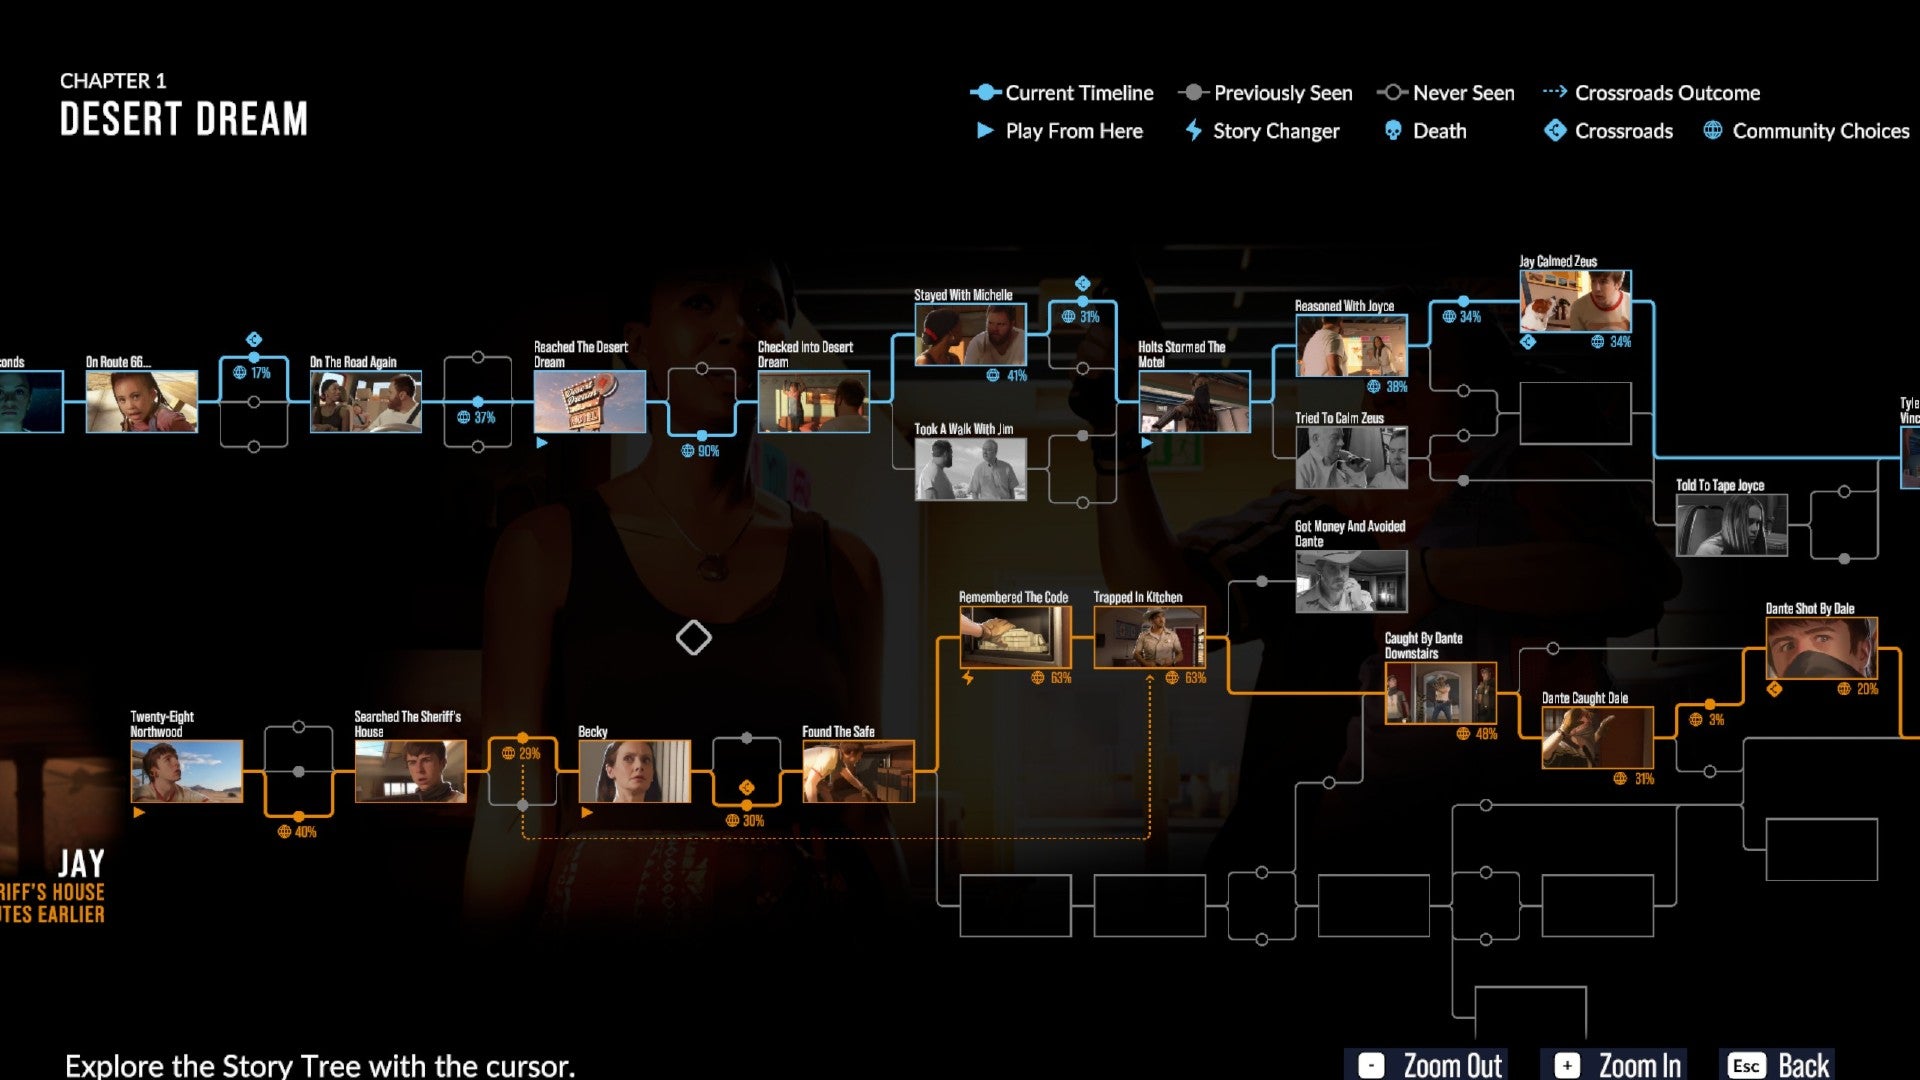 As Dusk Falls screenshot showing the branching paths on the Chapter 1 flowchart.